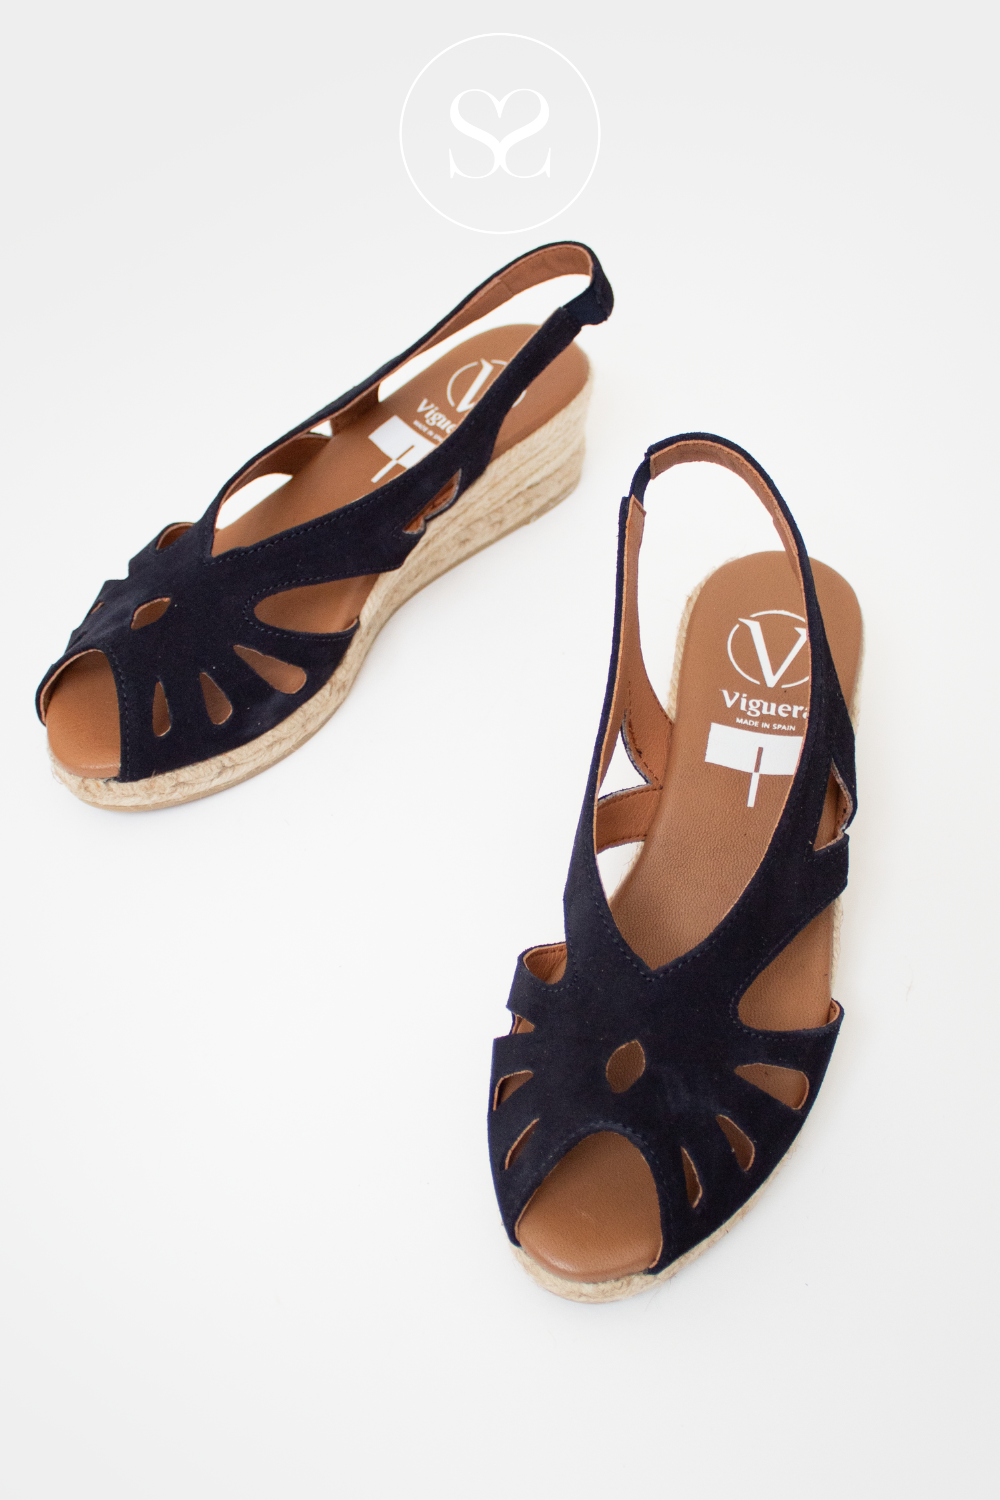 NAVY SLINGBACK ESPADRILLE WEDGE FROM VIGUERA